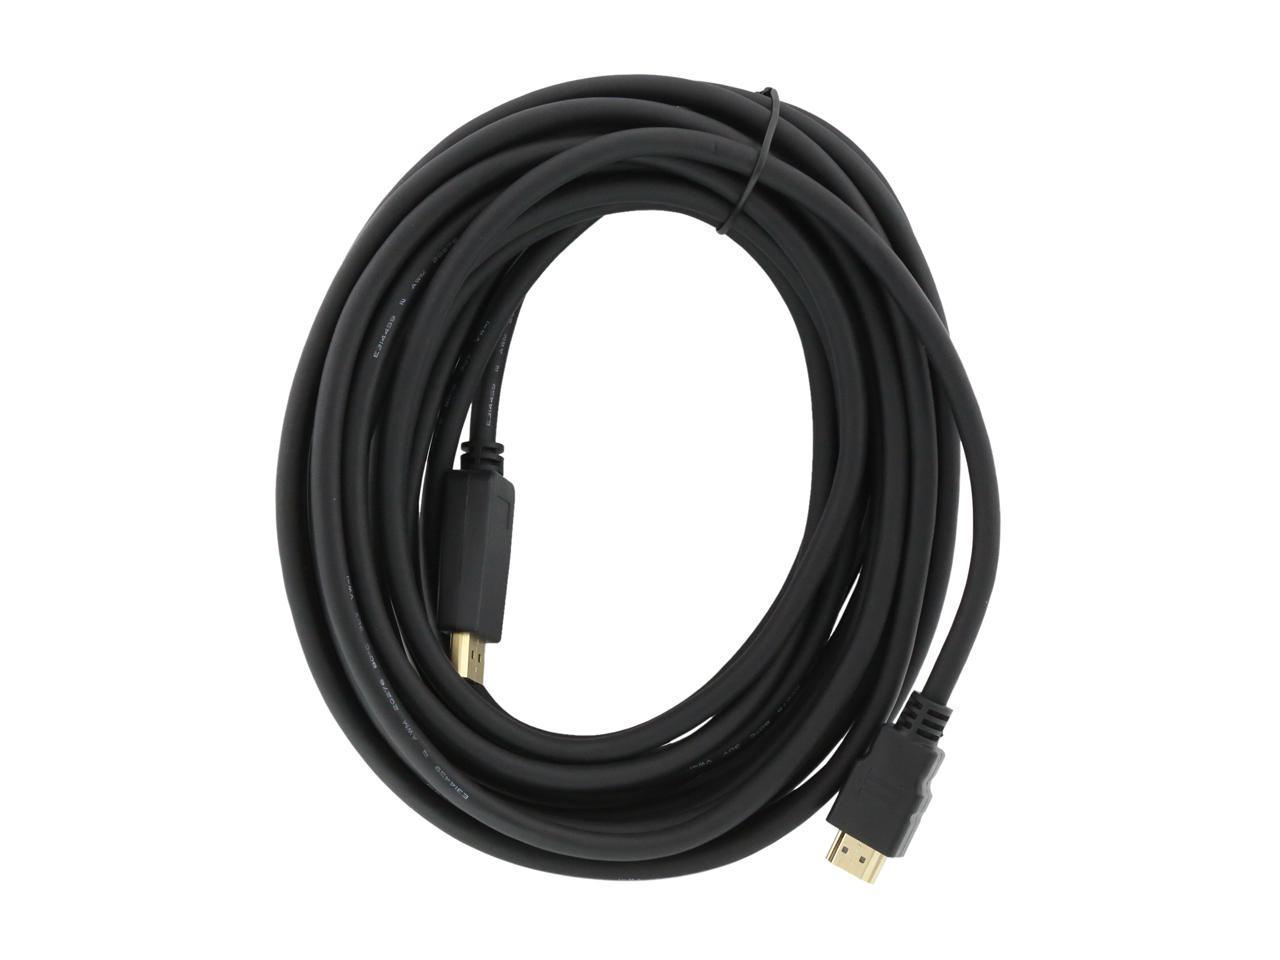 Nippon Labs DPHDMI25 DP to HDMI Cable 25 ft, Gold Plated DisplayPort to HDMI C eBay